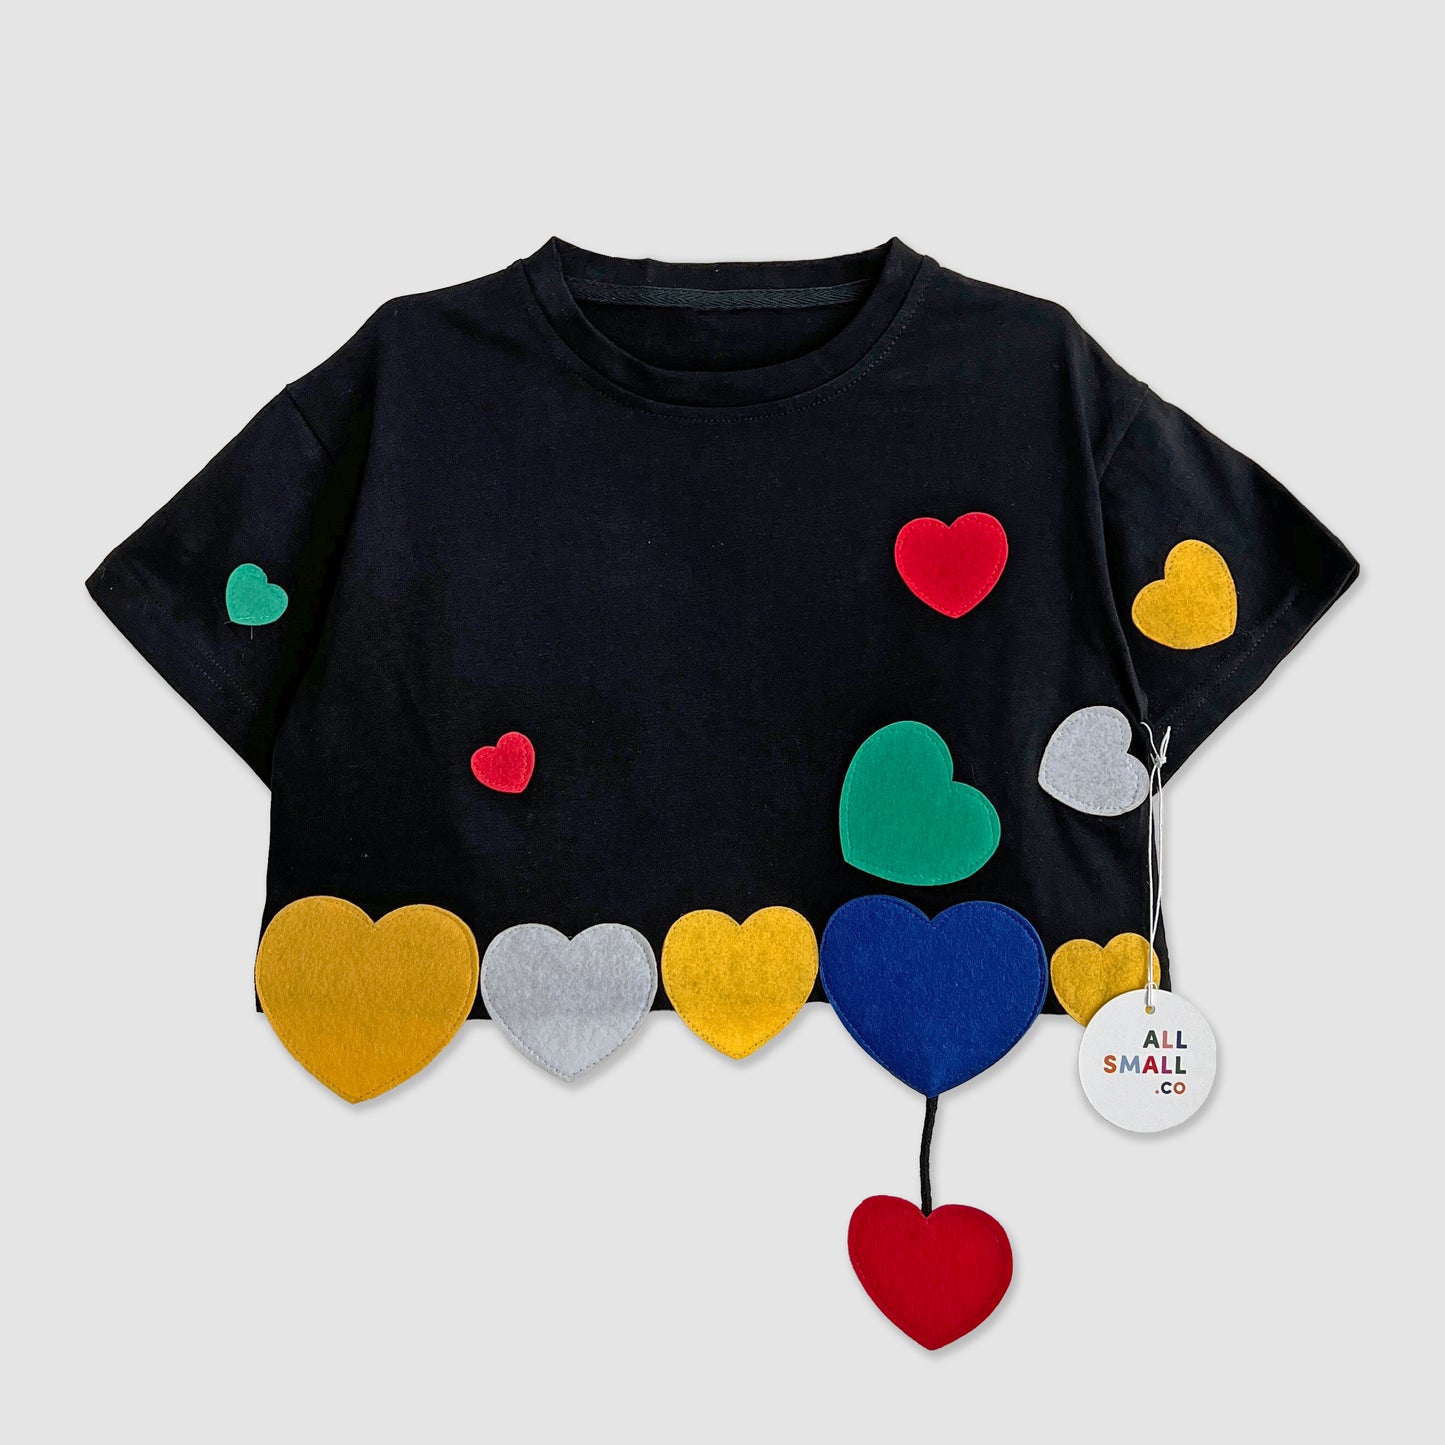 Clips of the Heart Tee